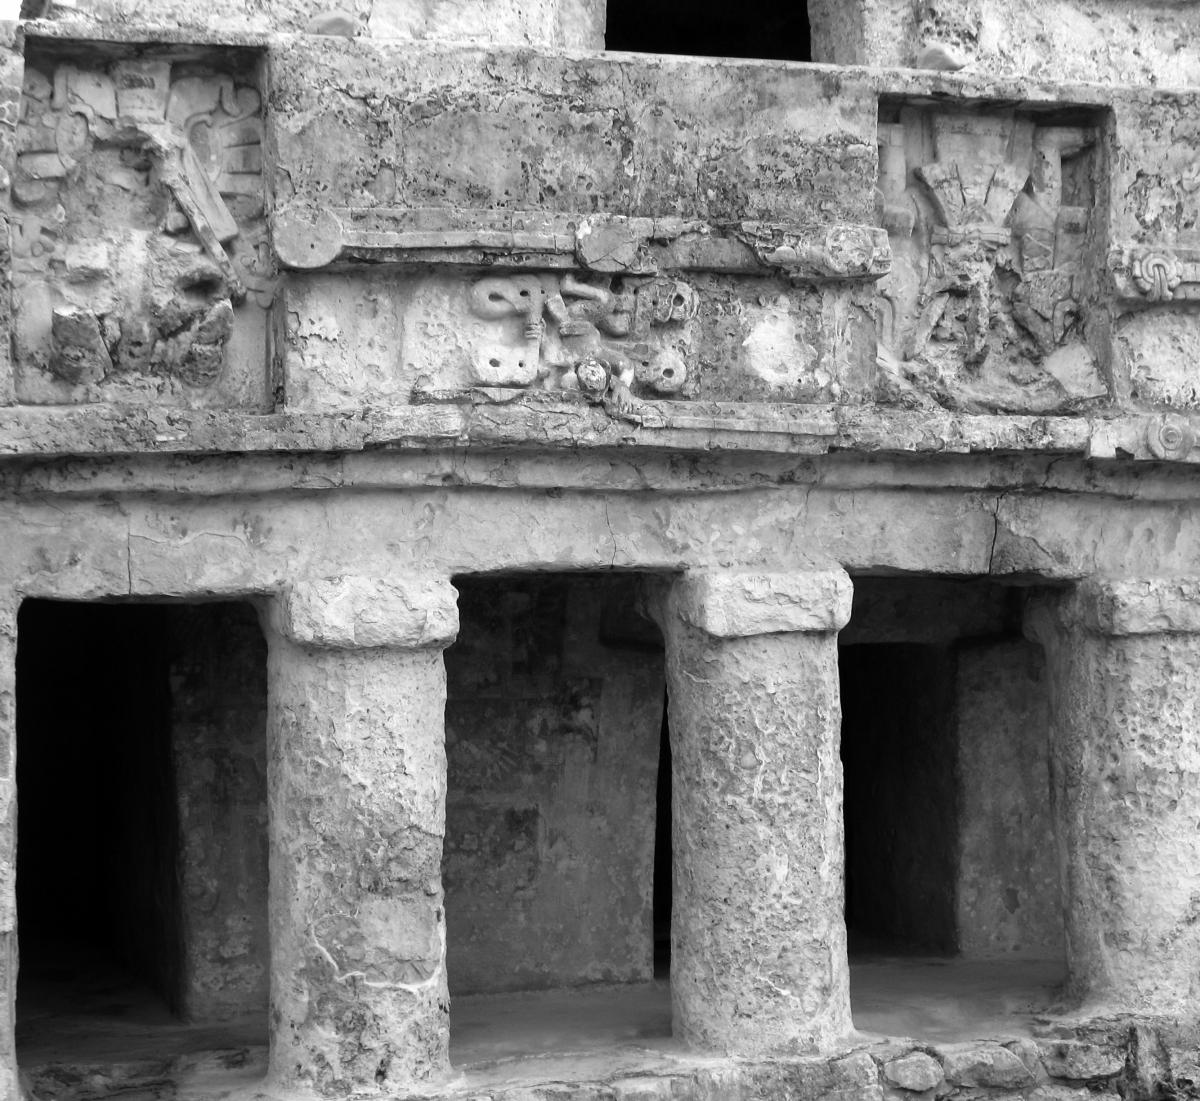 Mayan writings as inscriptions on stone